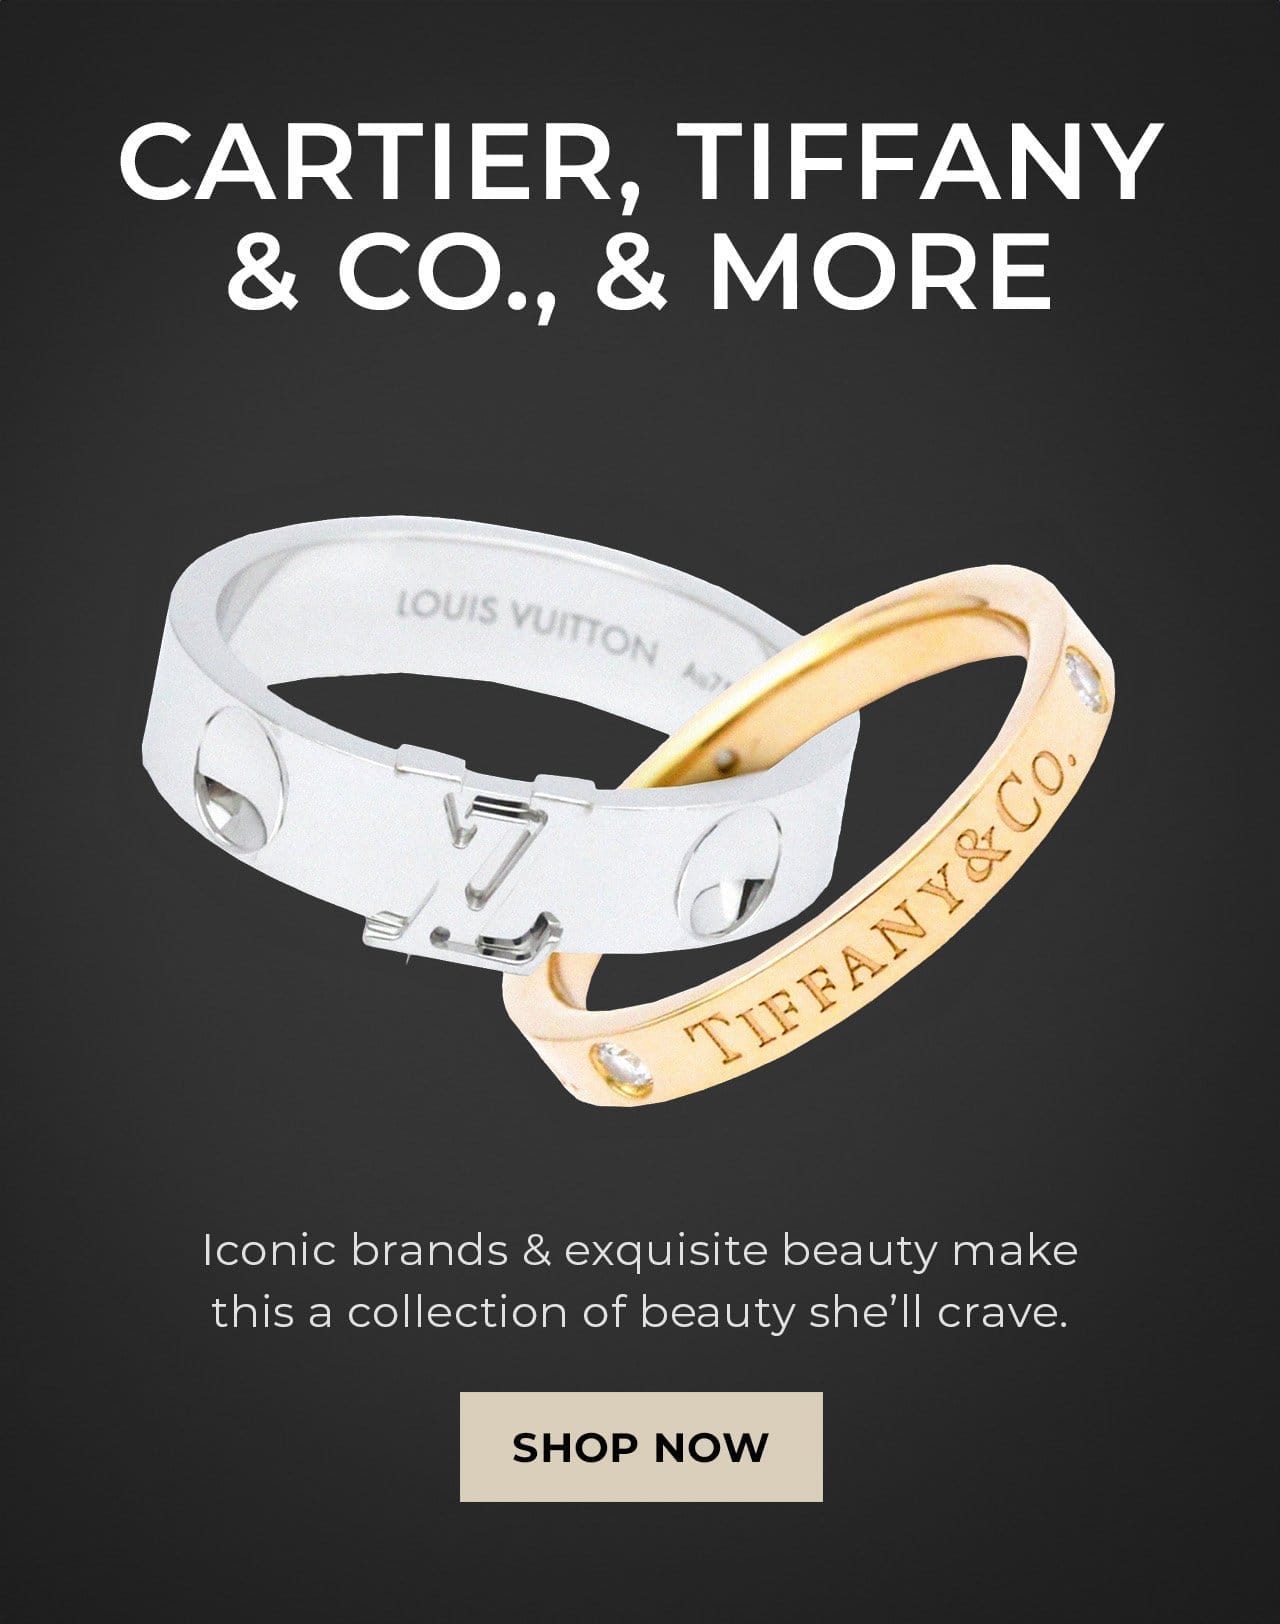 Cartier, Tiffany & Co., & More | SHOP NOW